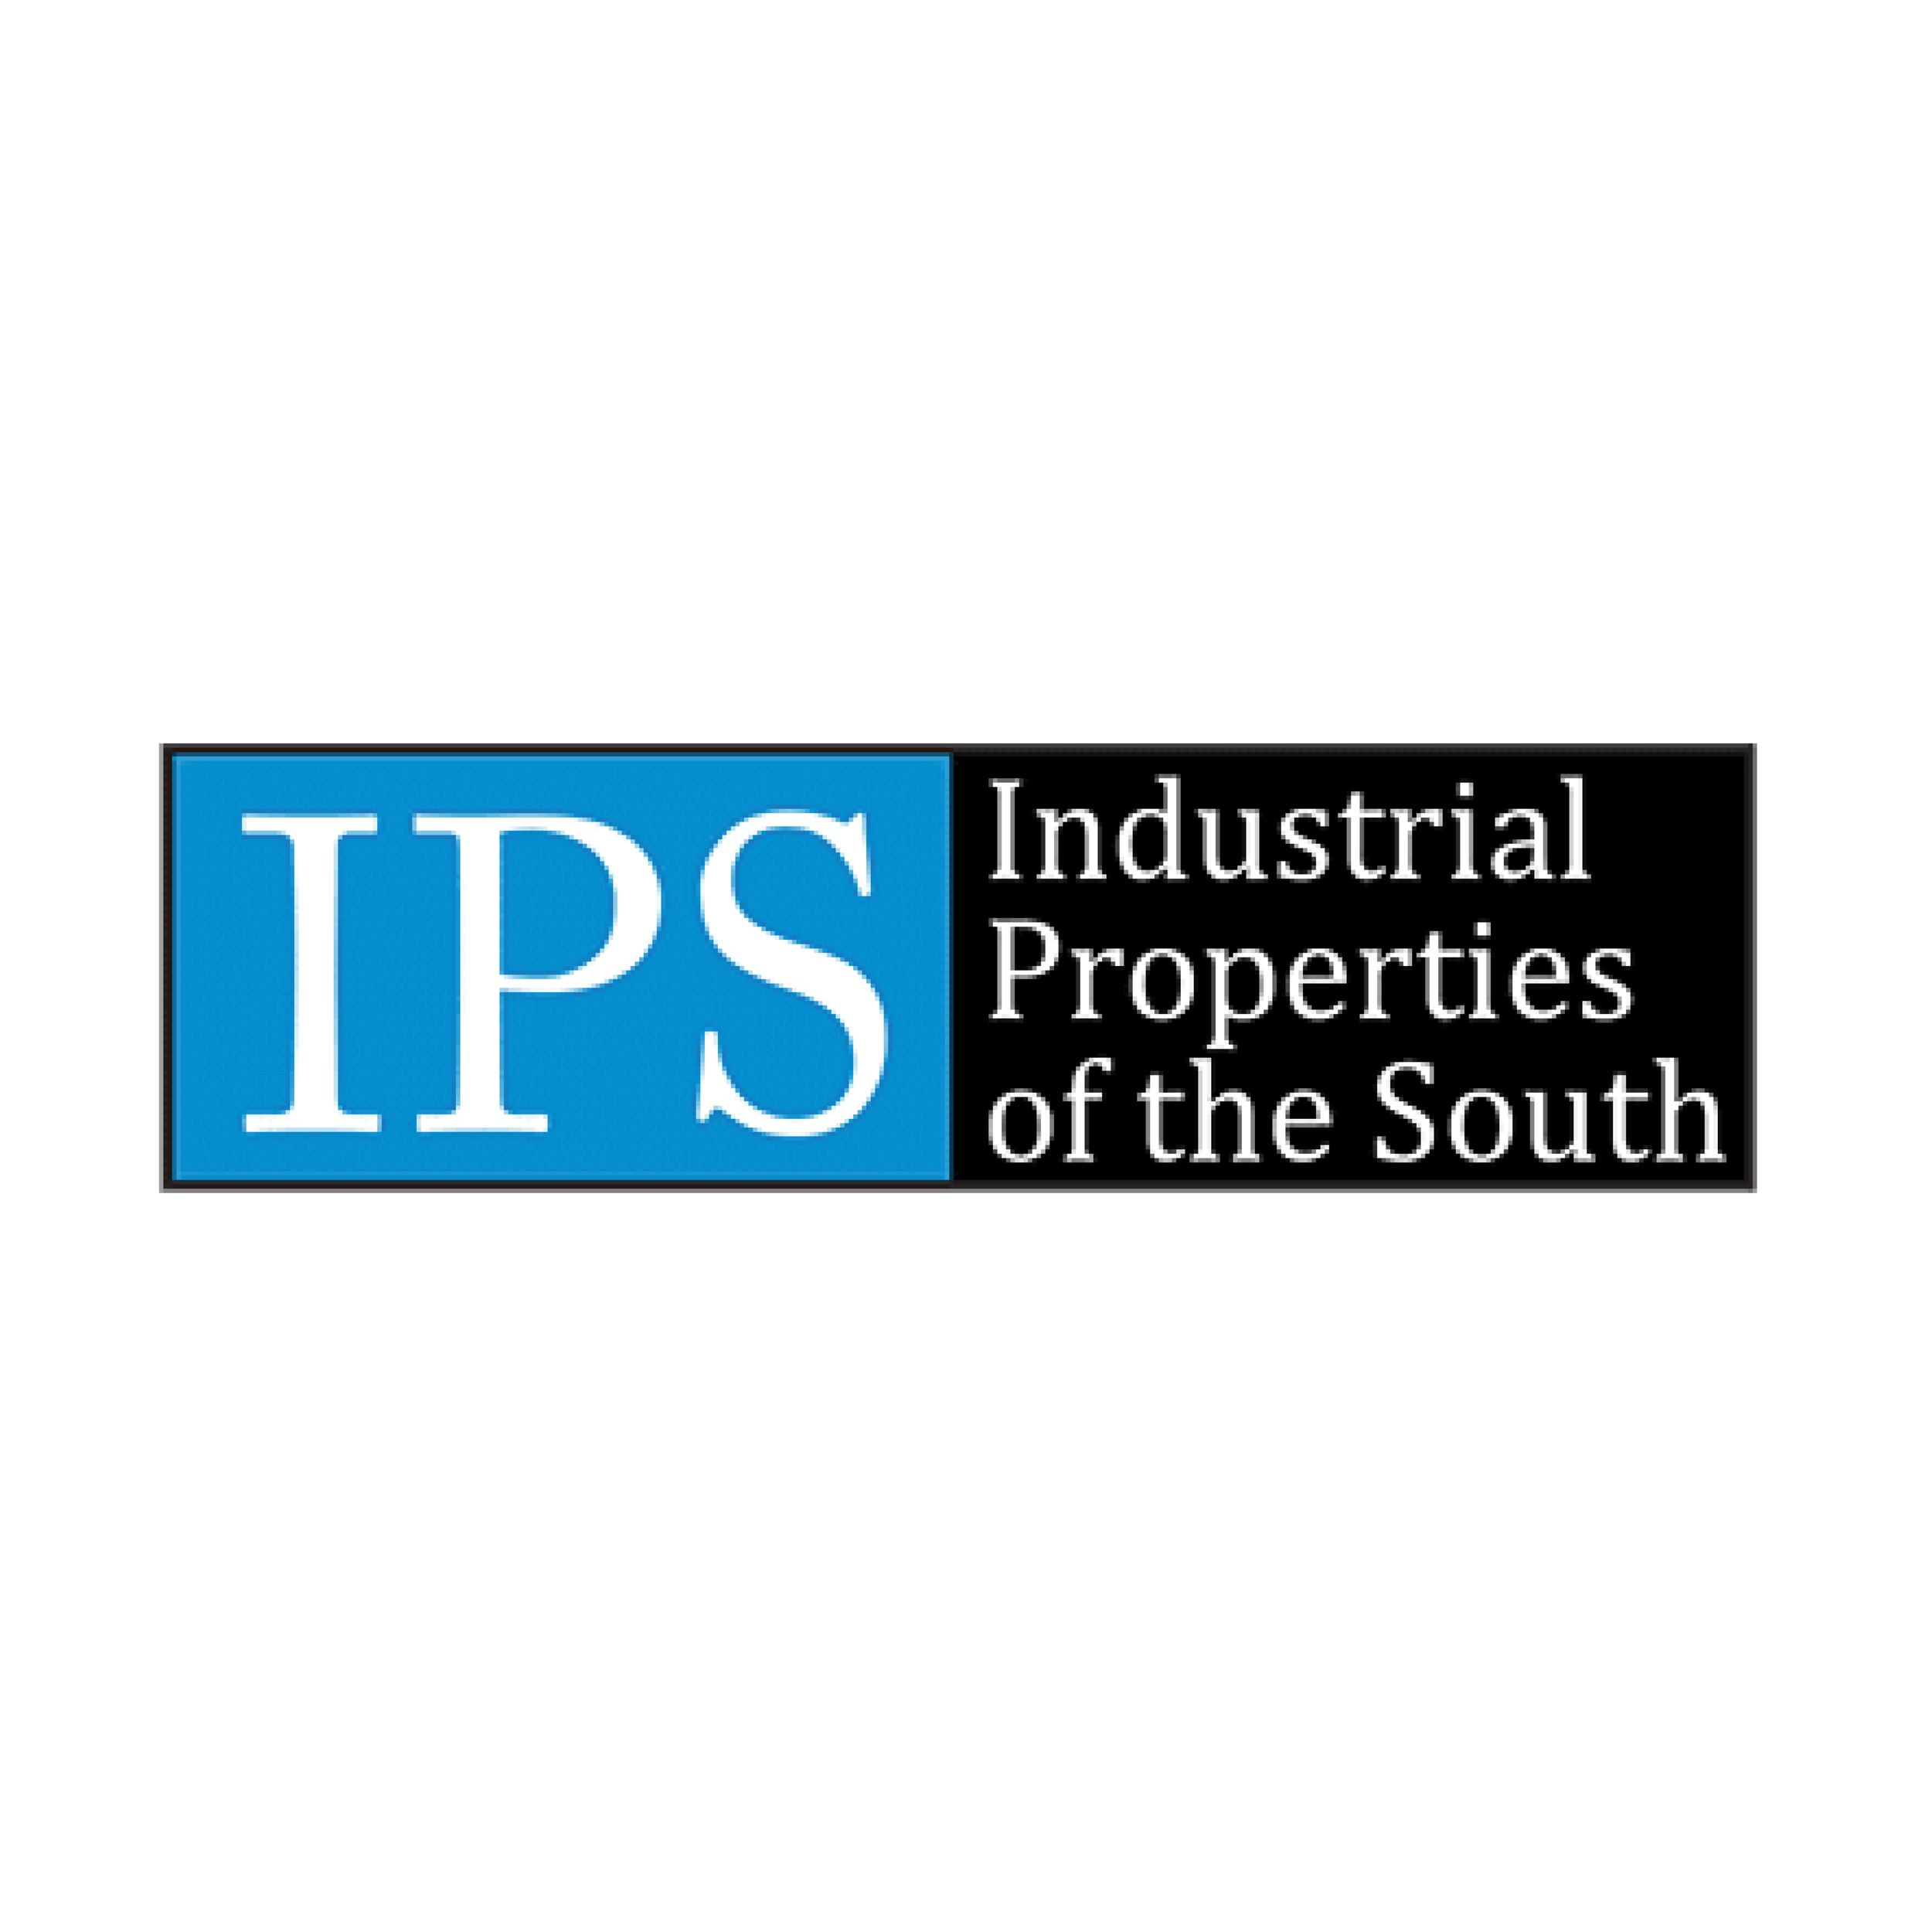 Industrial Properties of the South